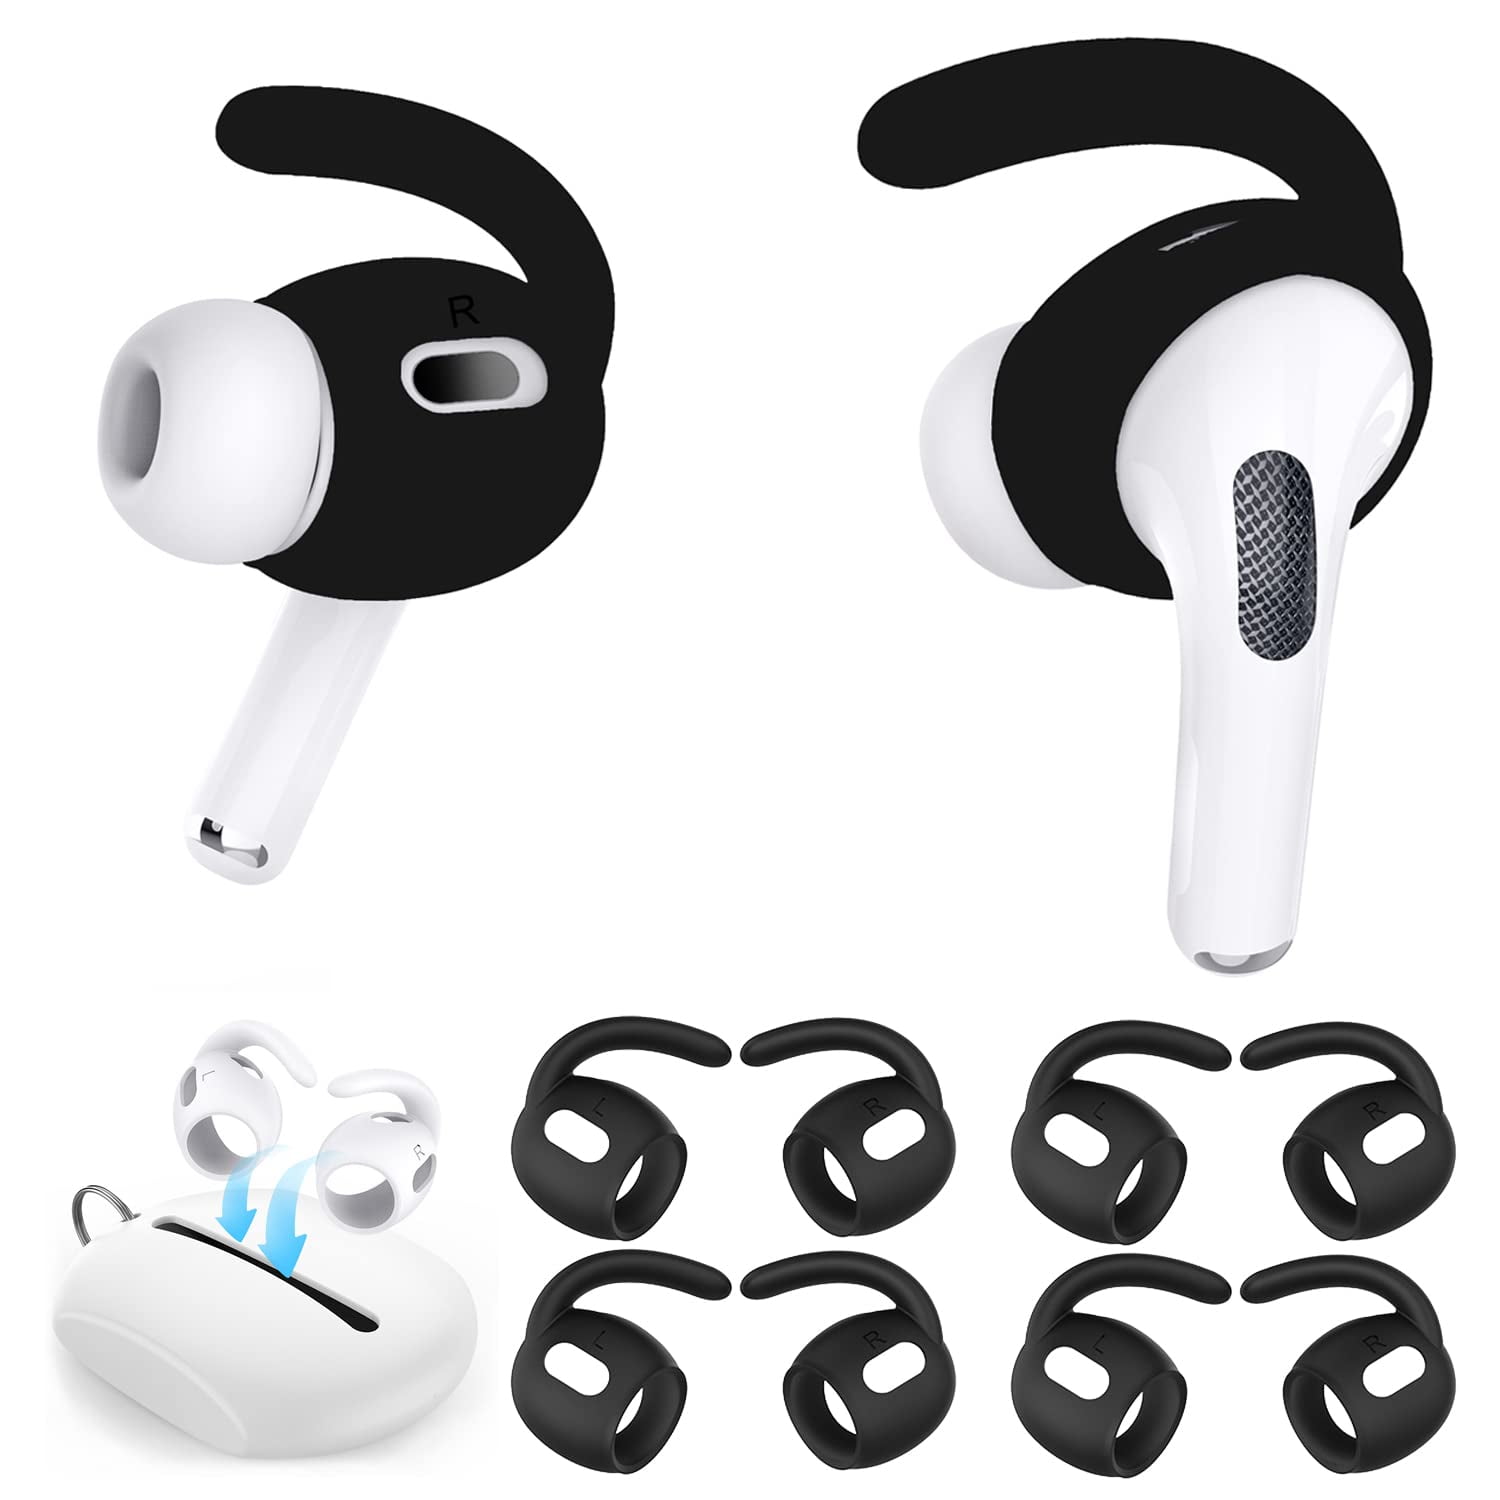 Luckvan Replacement for AirPods Pro2 Ear Tips Anti Slip Silicone Earbuds Cover for AirPods Pro2 Accessory Wing Tips Black 4 Pairs - Walmart.com